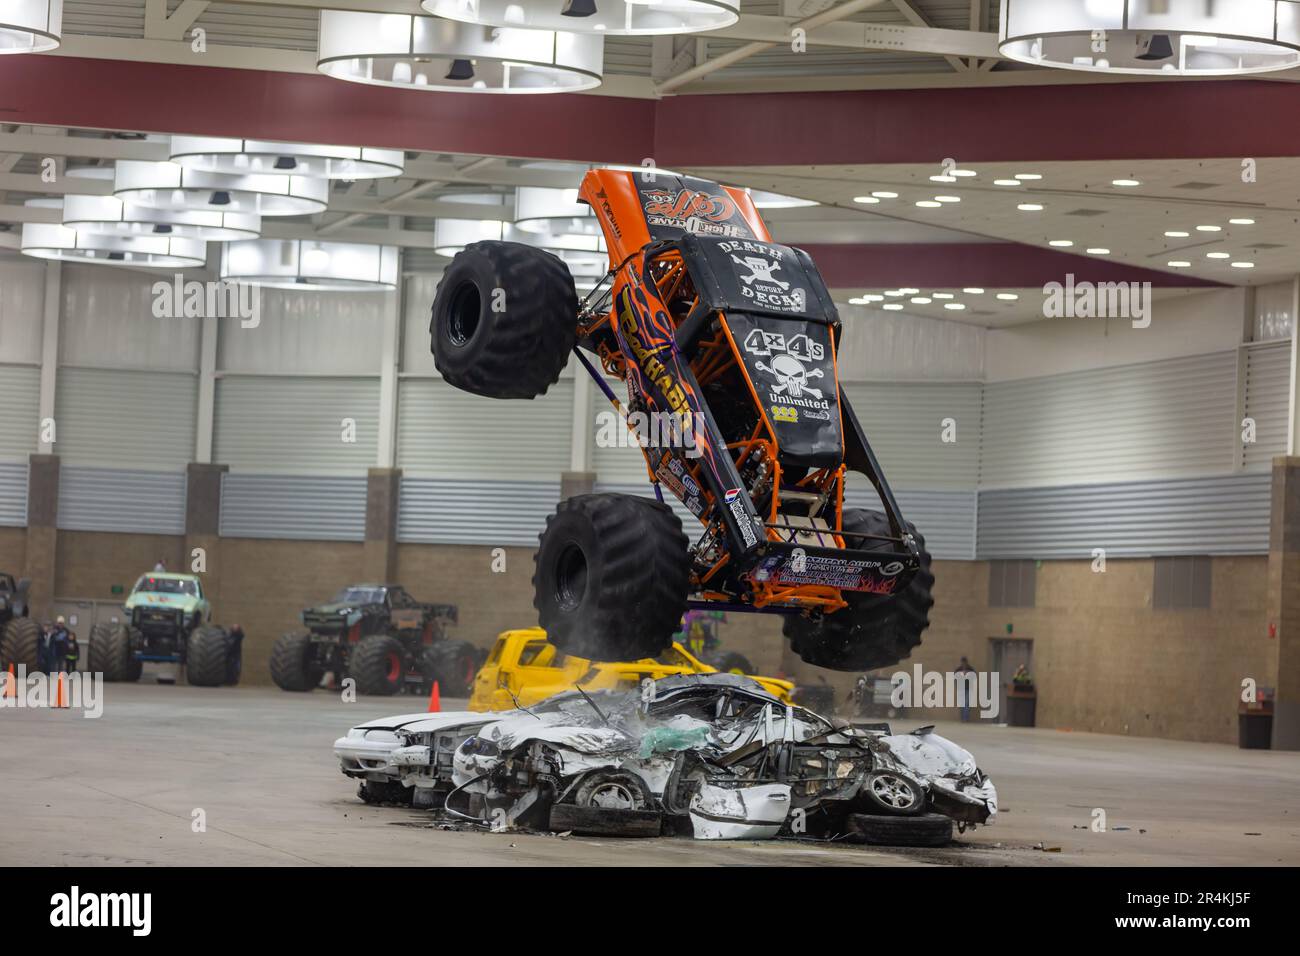 The monster truck 'Bad Habit,' a 1979 Ford F-250, performs at the Allen County War Memorial Coliseum Expo Center in Fort Wayne, Indiana, USA. Stock Photo